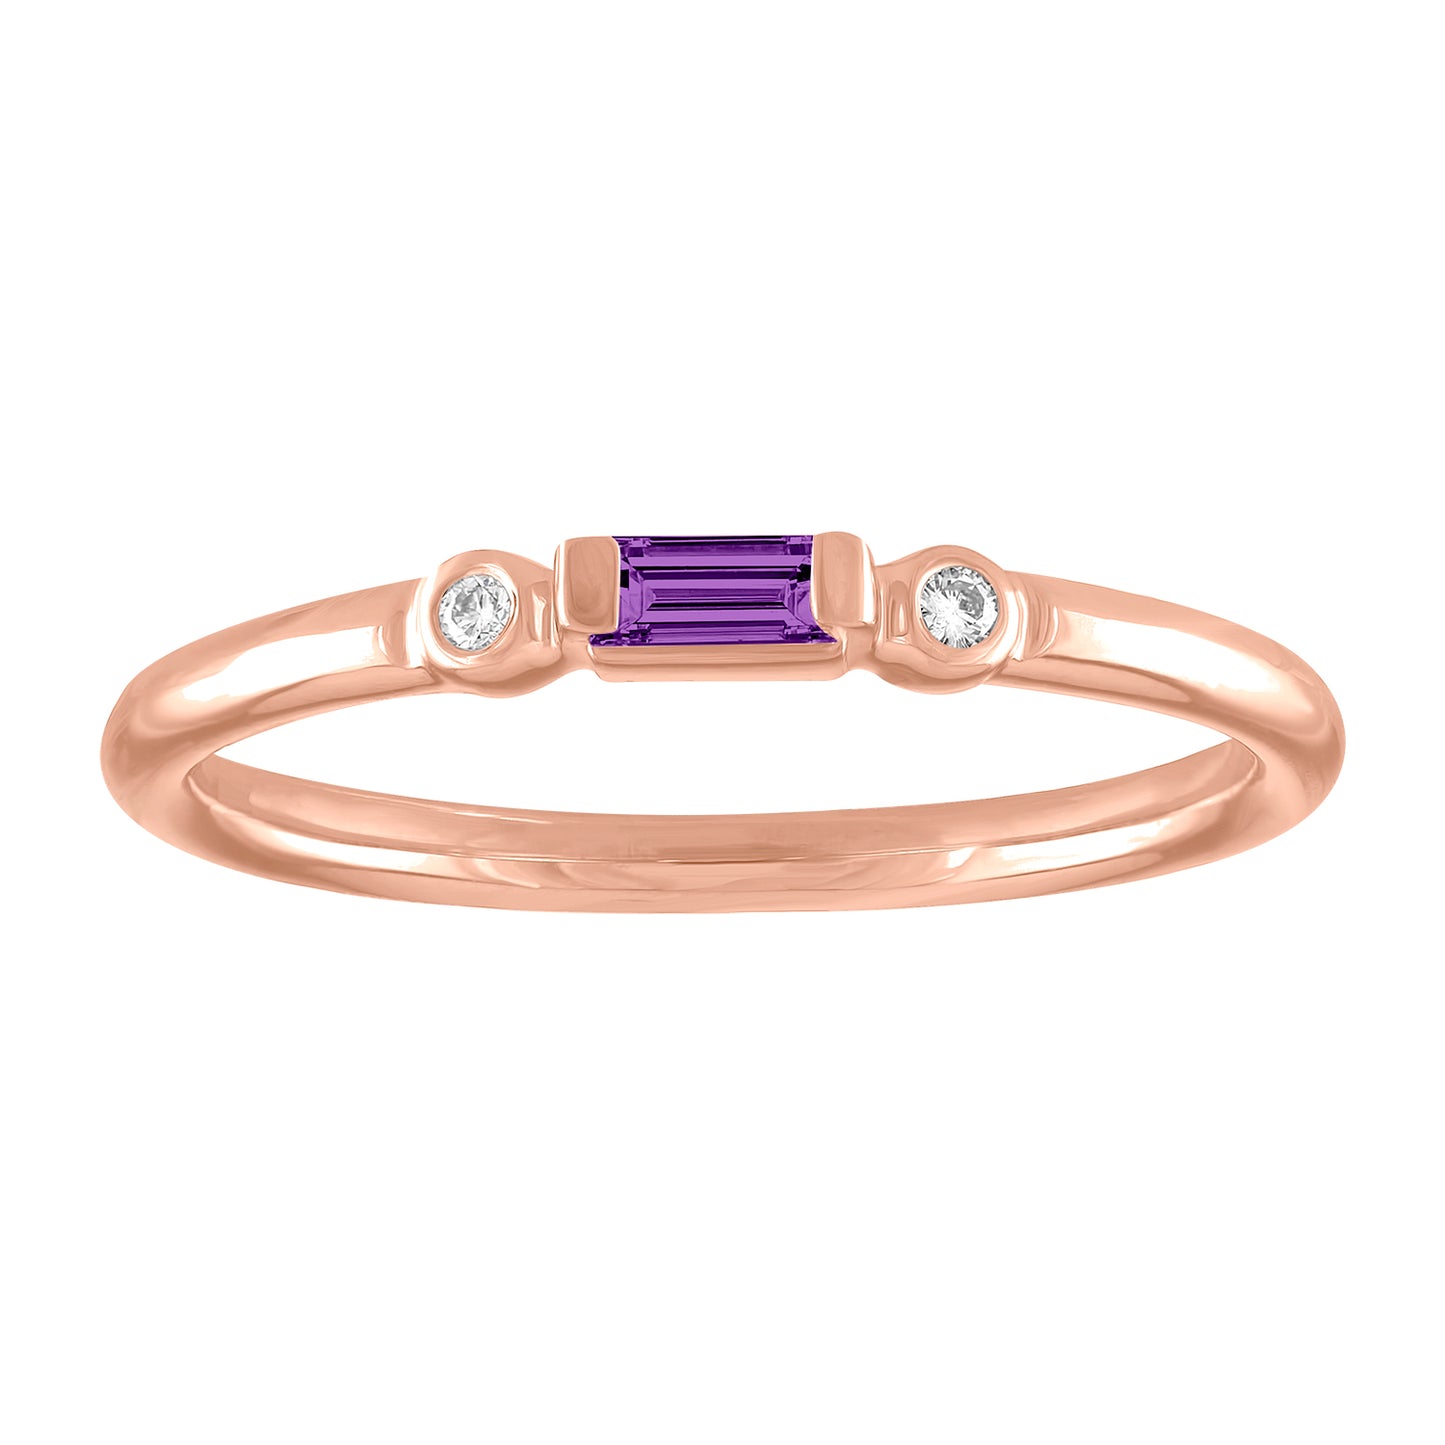 Rose gold skinny band with an amethyst baguette in the center and two round diamonds on the side. 